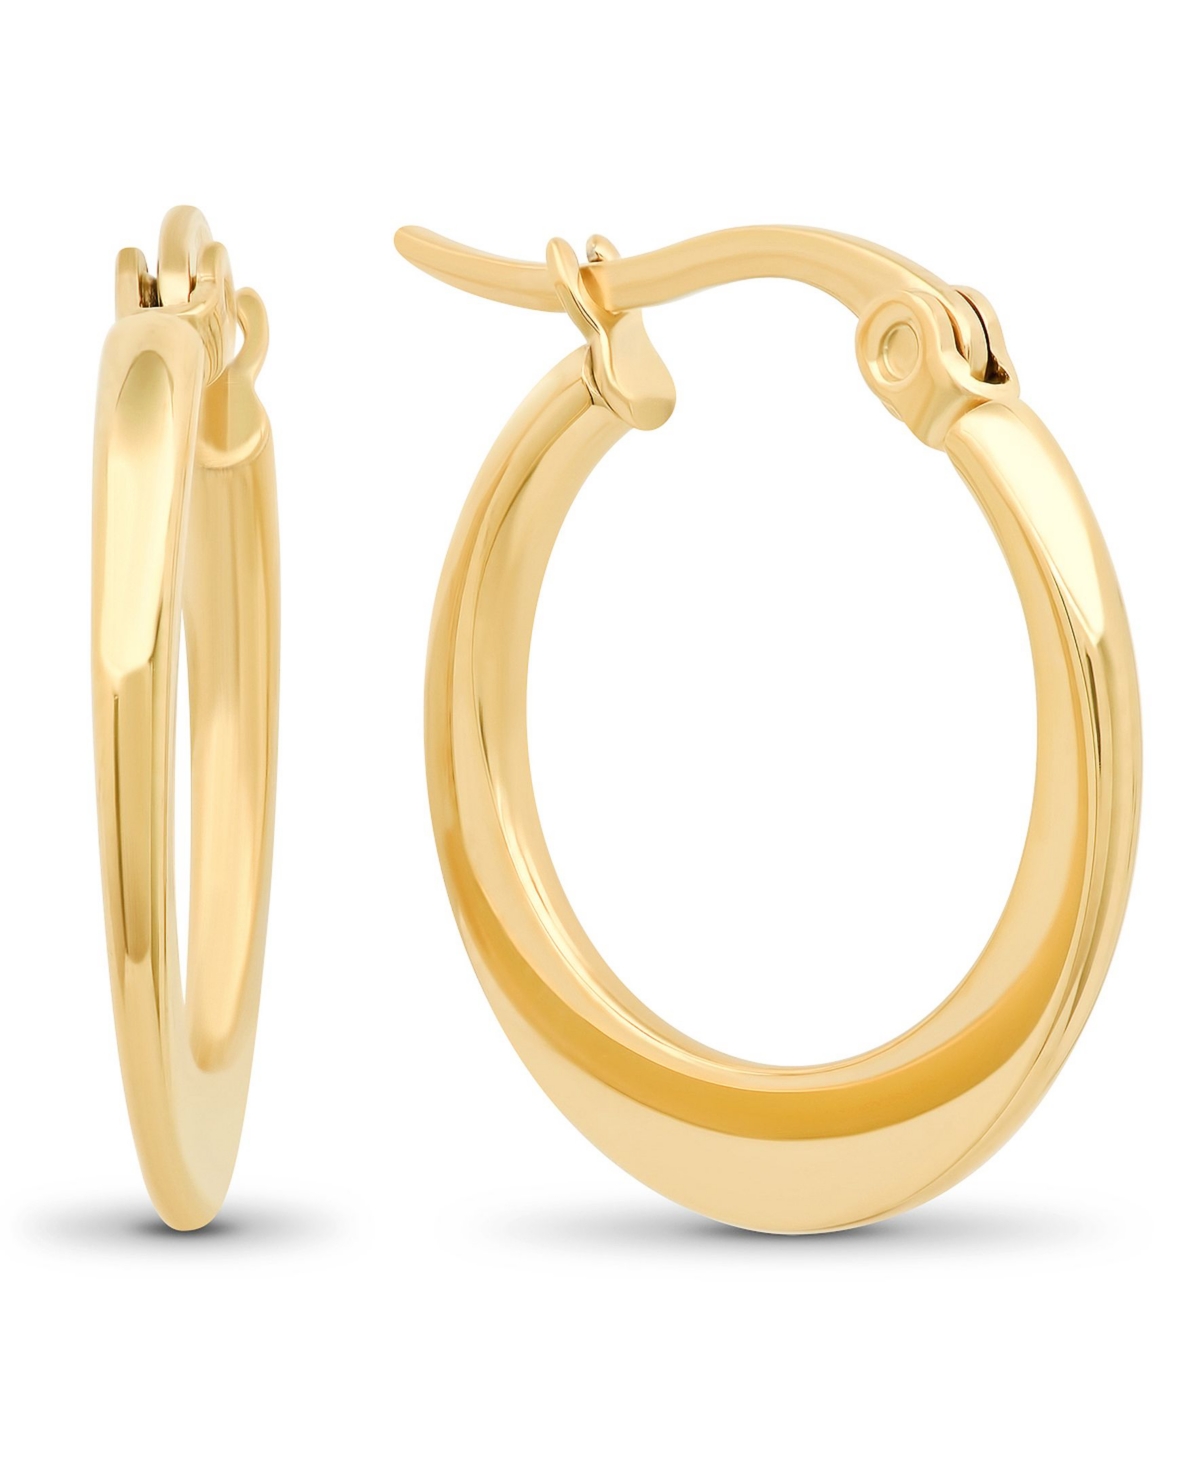 18K Gold Plated Stainless Steel Flat Hoop Earrings - Gold-Plated